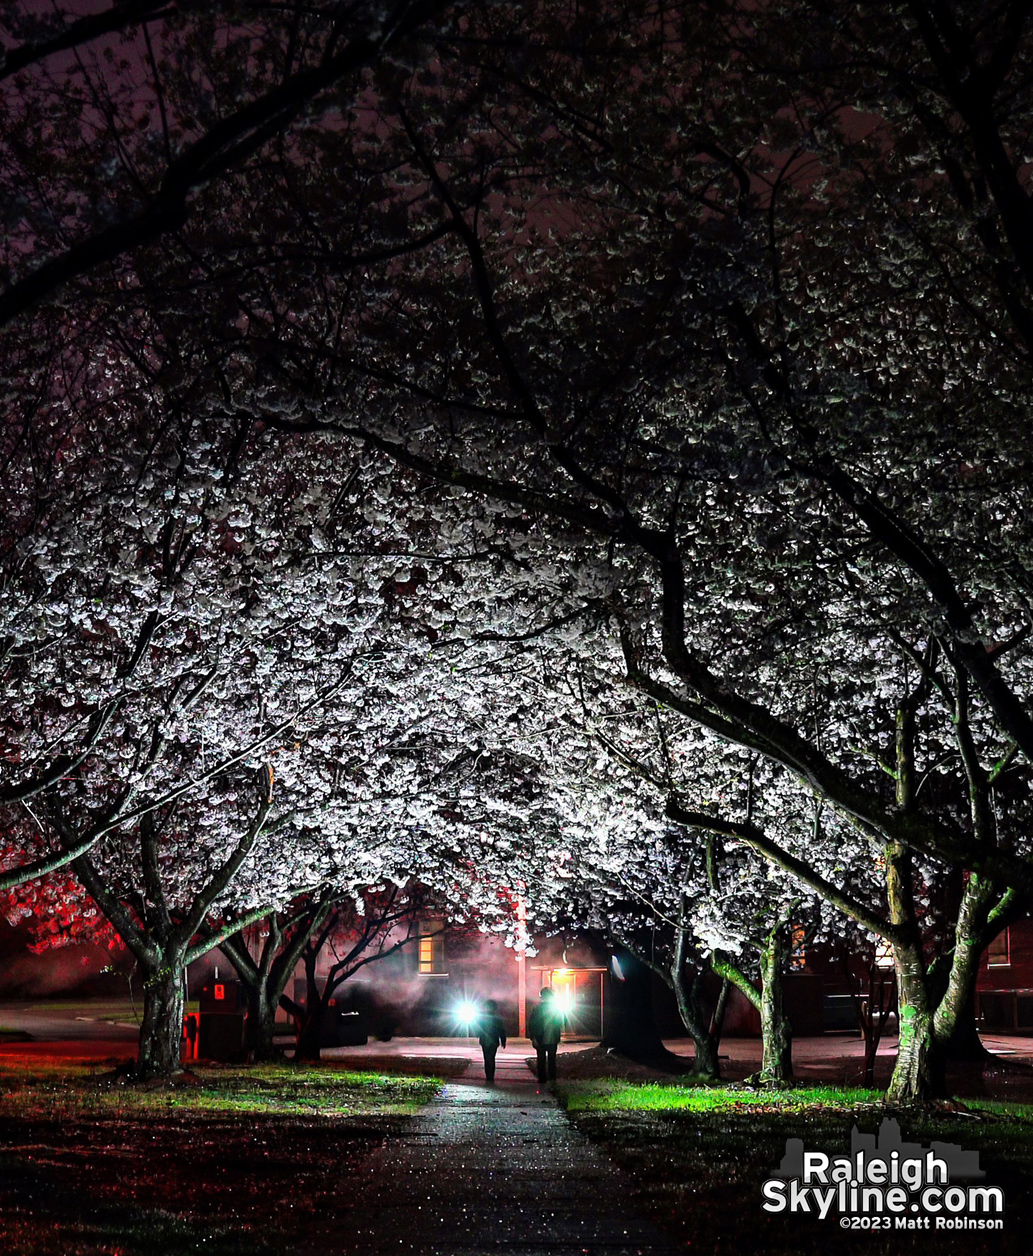 My kids were my assistants last night as I had them light up the flowering cherry blossom trees at Dix Park